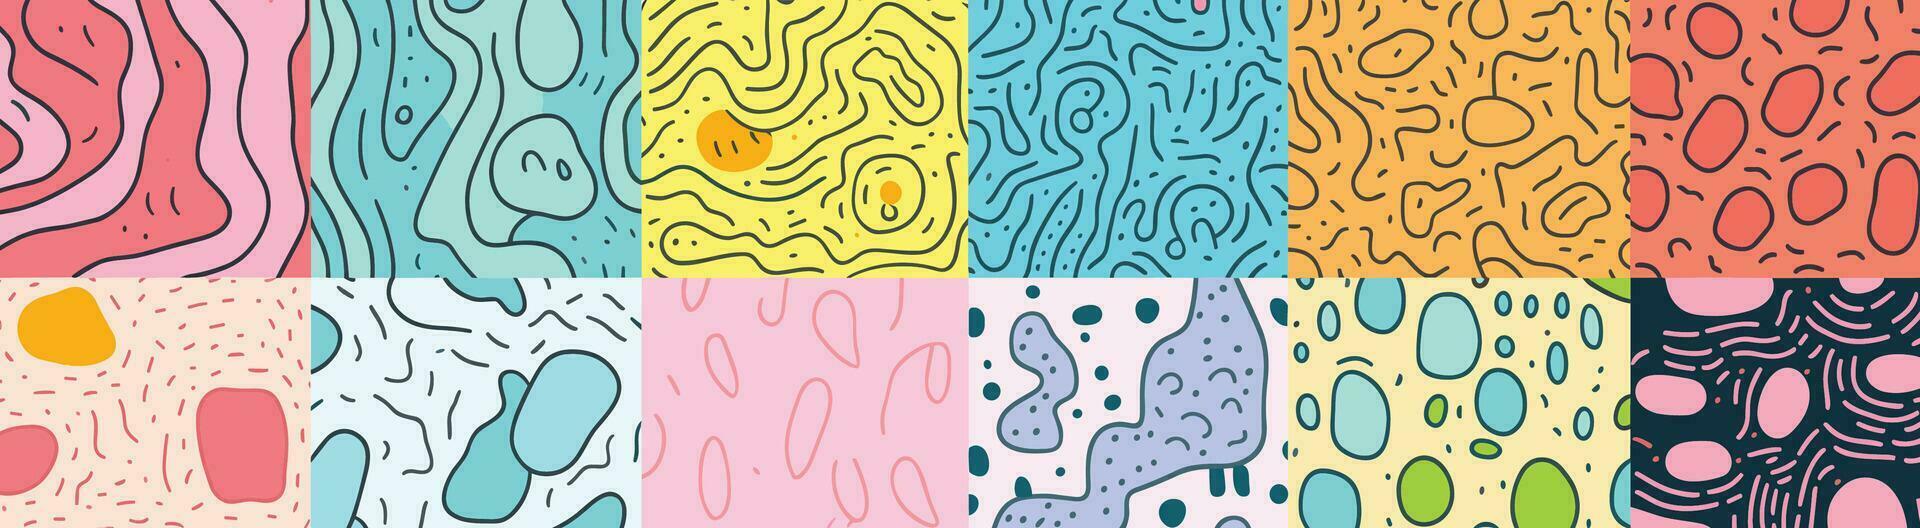 Colorful Line Doodle. A Creative Abstract Art Background Collection Suitable for Children or Festive Celebration Designs. This Bundle Offers a Simple, Childish Scribble Wallpaper vector